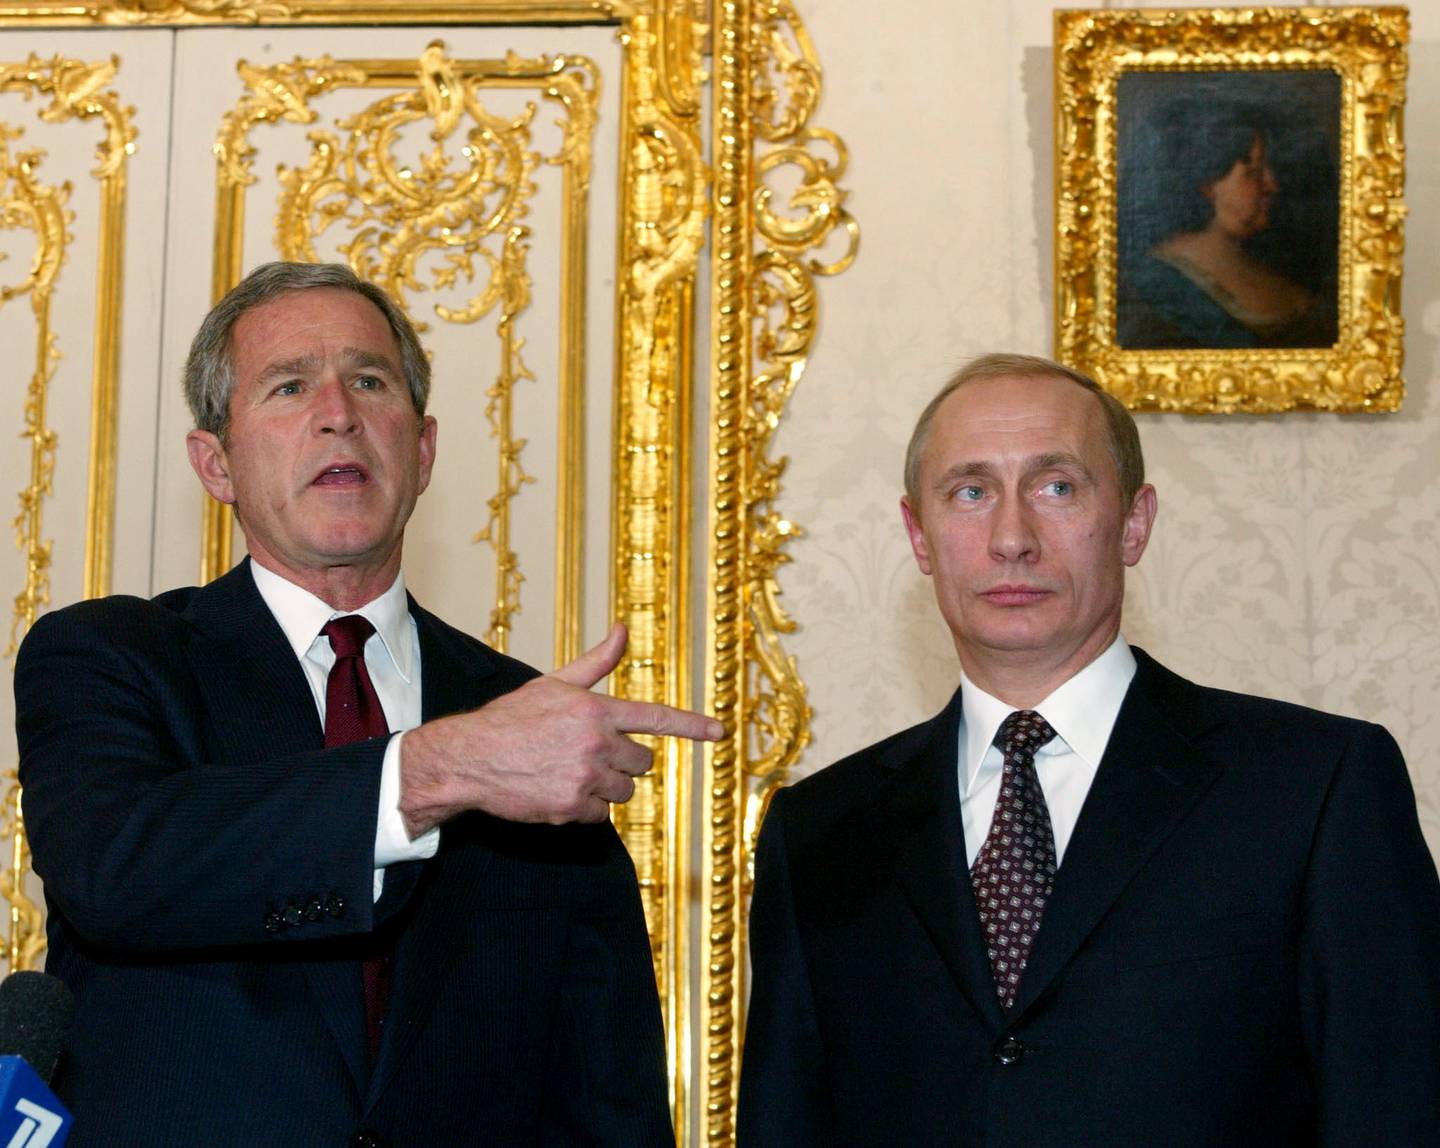 U.S. President George W. Bush gestures speaking to journalists as Russian President Vladimir Putin stands by in Catherine Palace in Pushkin outside St. Petersburg, Russia, Friday Nov. 22, 2002. Bush came to St. Petersburg from a historic NATO summit in Prague one day after the alliance agreed to expand its membership into the territory of the former Soviet Union. (AP Photo/Dmitry Astakhov, Izvestia, pool)